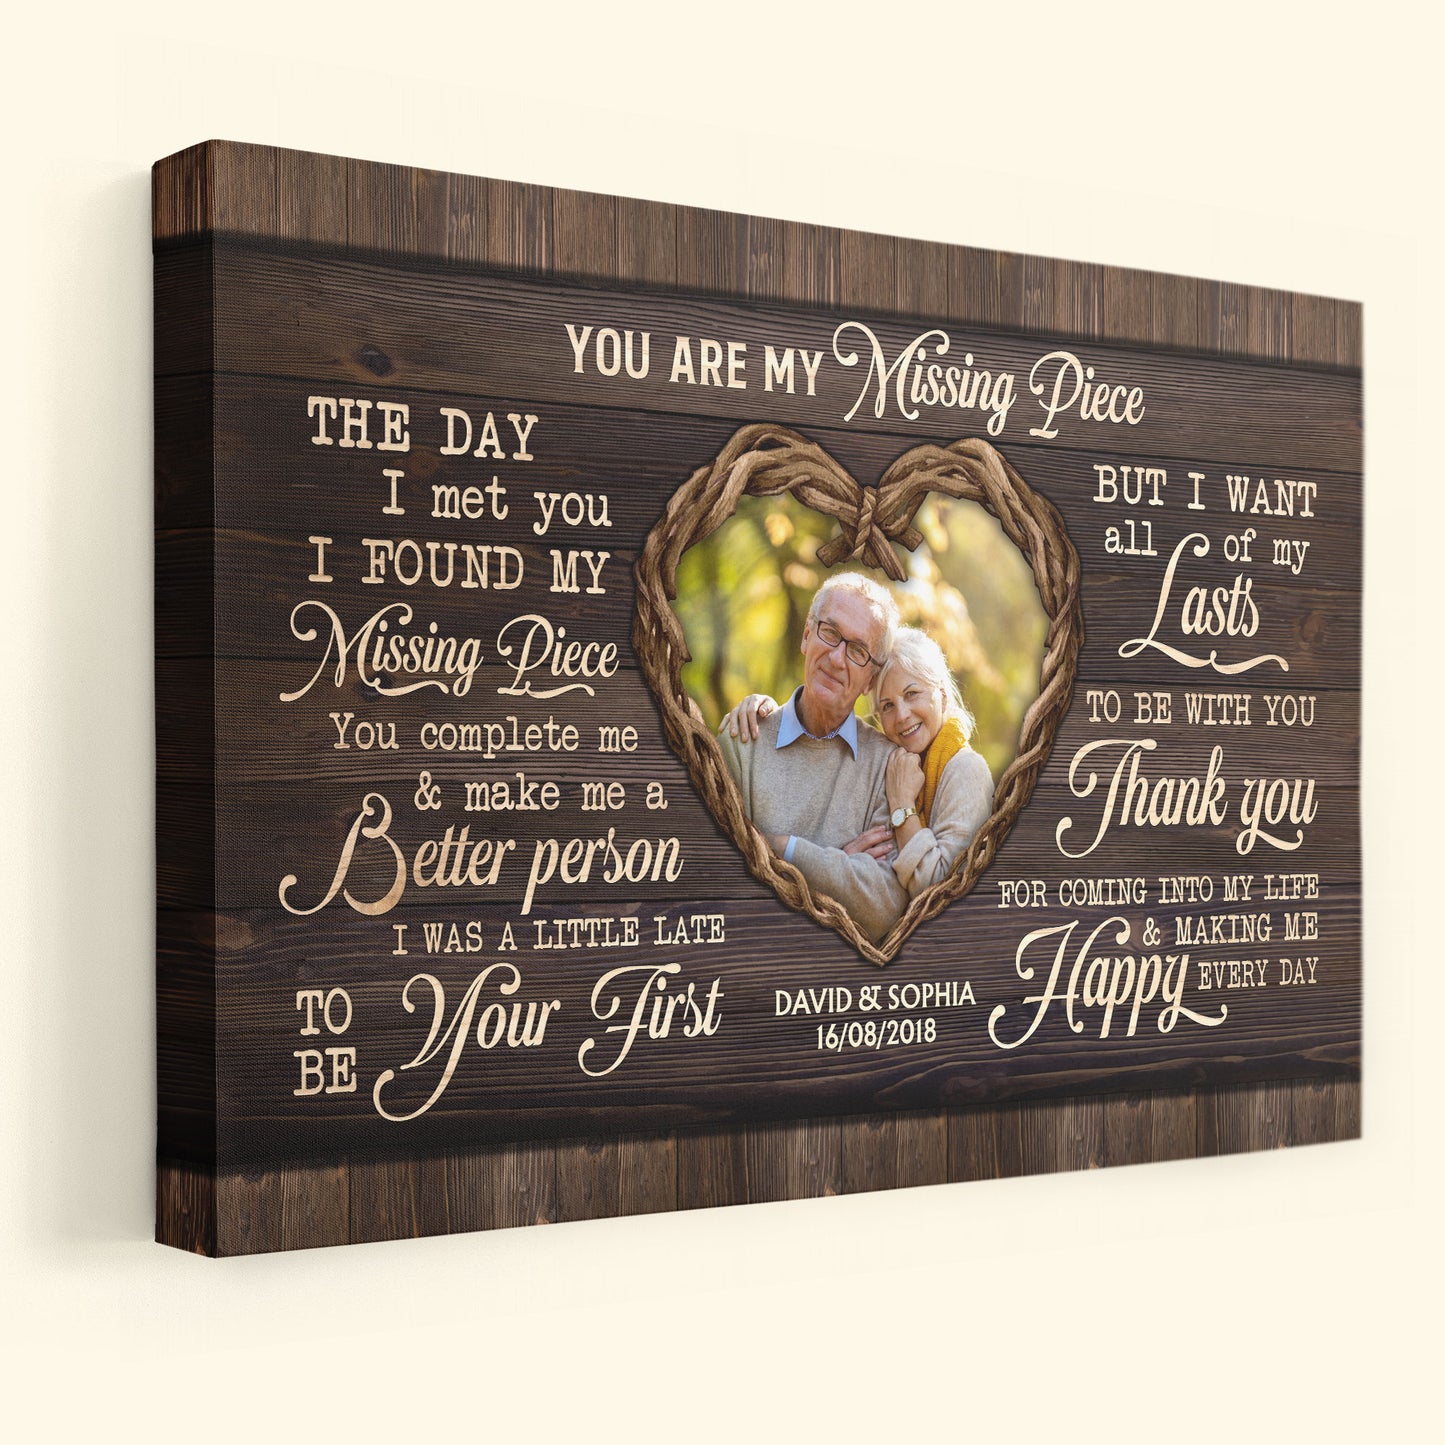 You Are My Missing Piece - Personalized Photo Poster/Wrapped Canvas